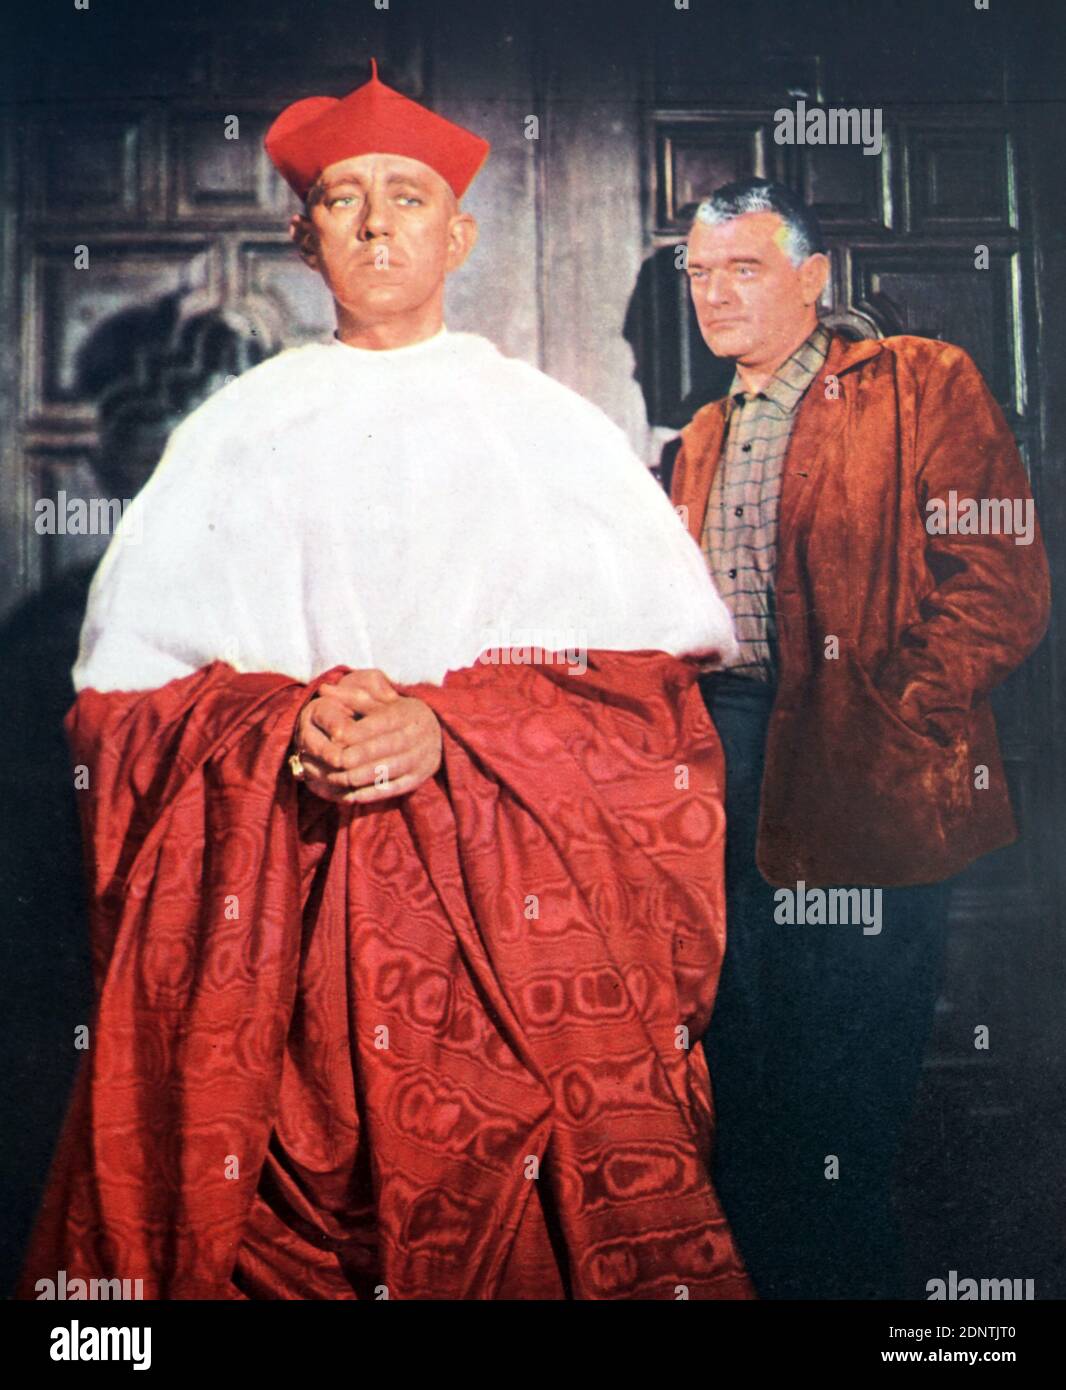 Film still from 'The Prisoner' starring Alec Guinness, Jack Hawkins, Ronald Lewis, and Wilfrid Lawson. Stock Photo